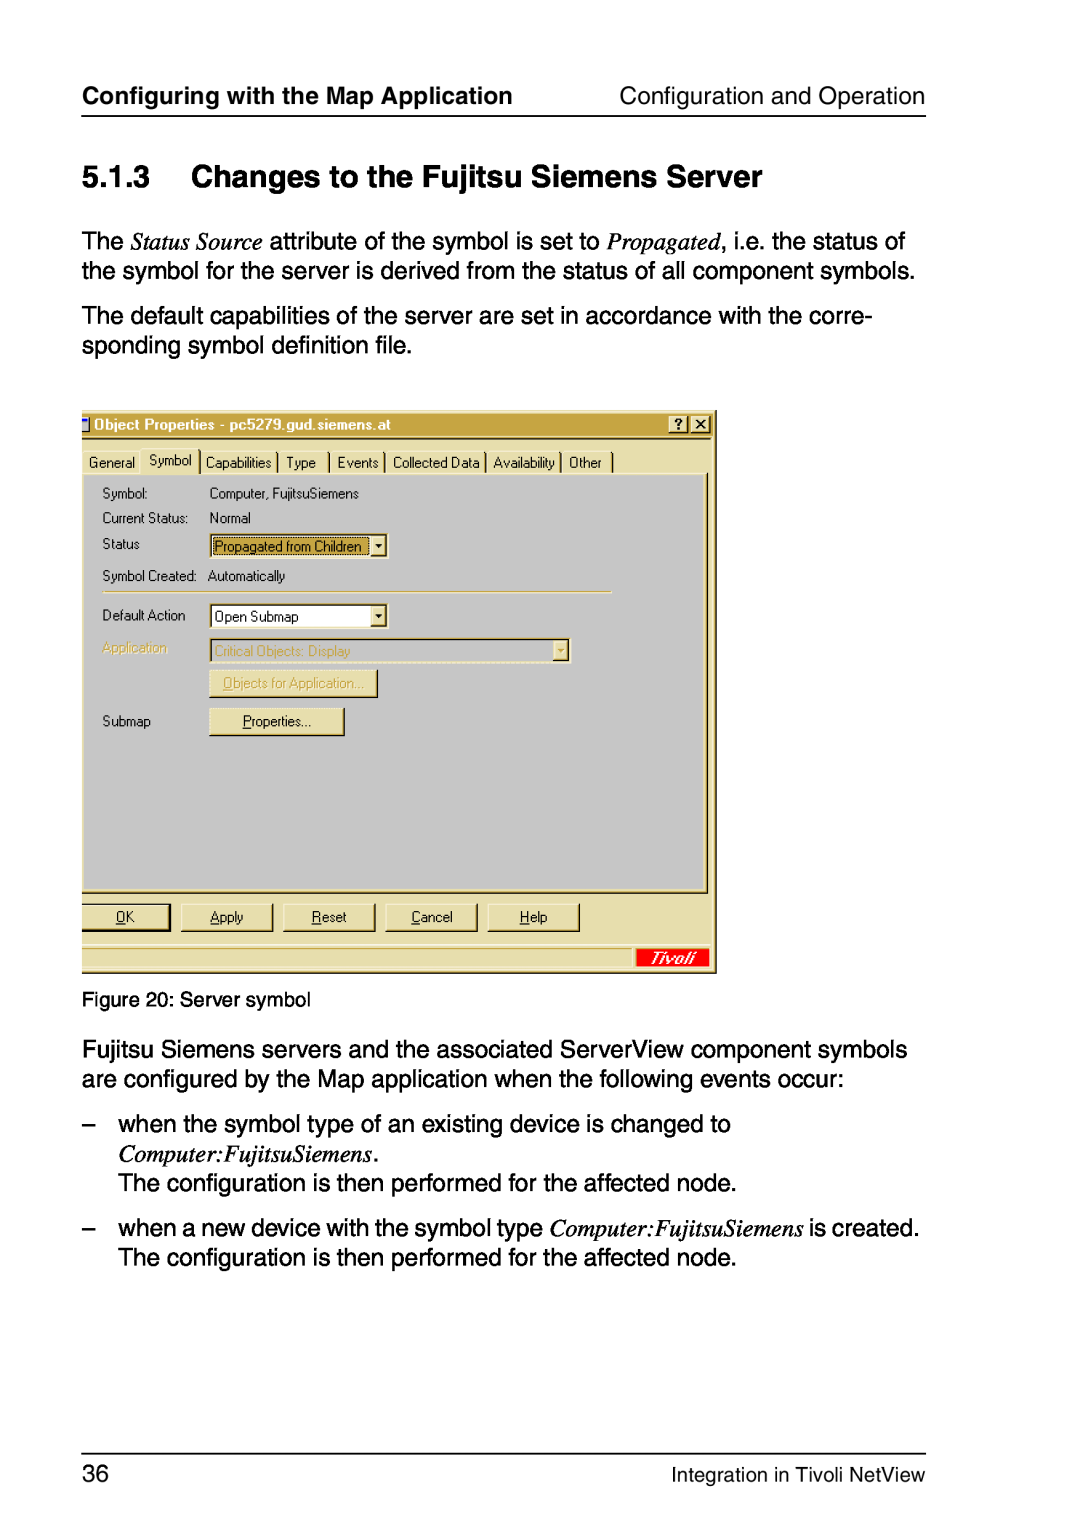 3D Connexion TivoII manual 5.1.3Changes to the Fujitsu Siemens Server, Configuring with the Map Application 